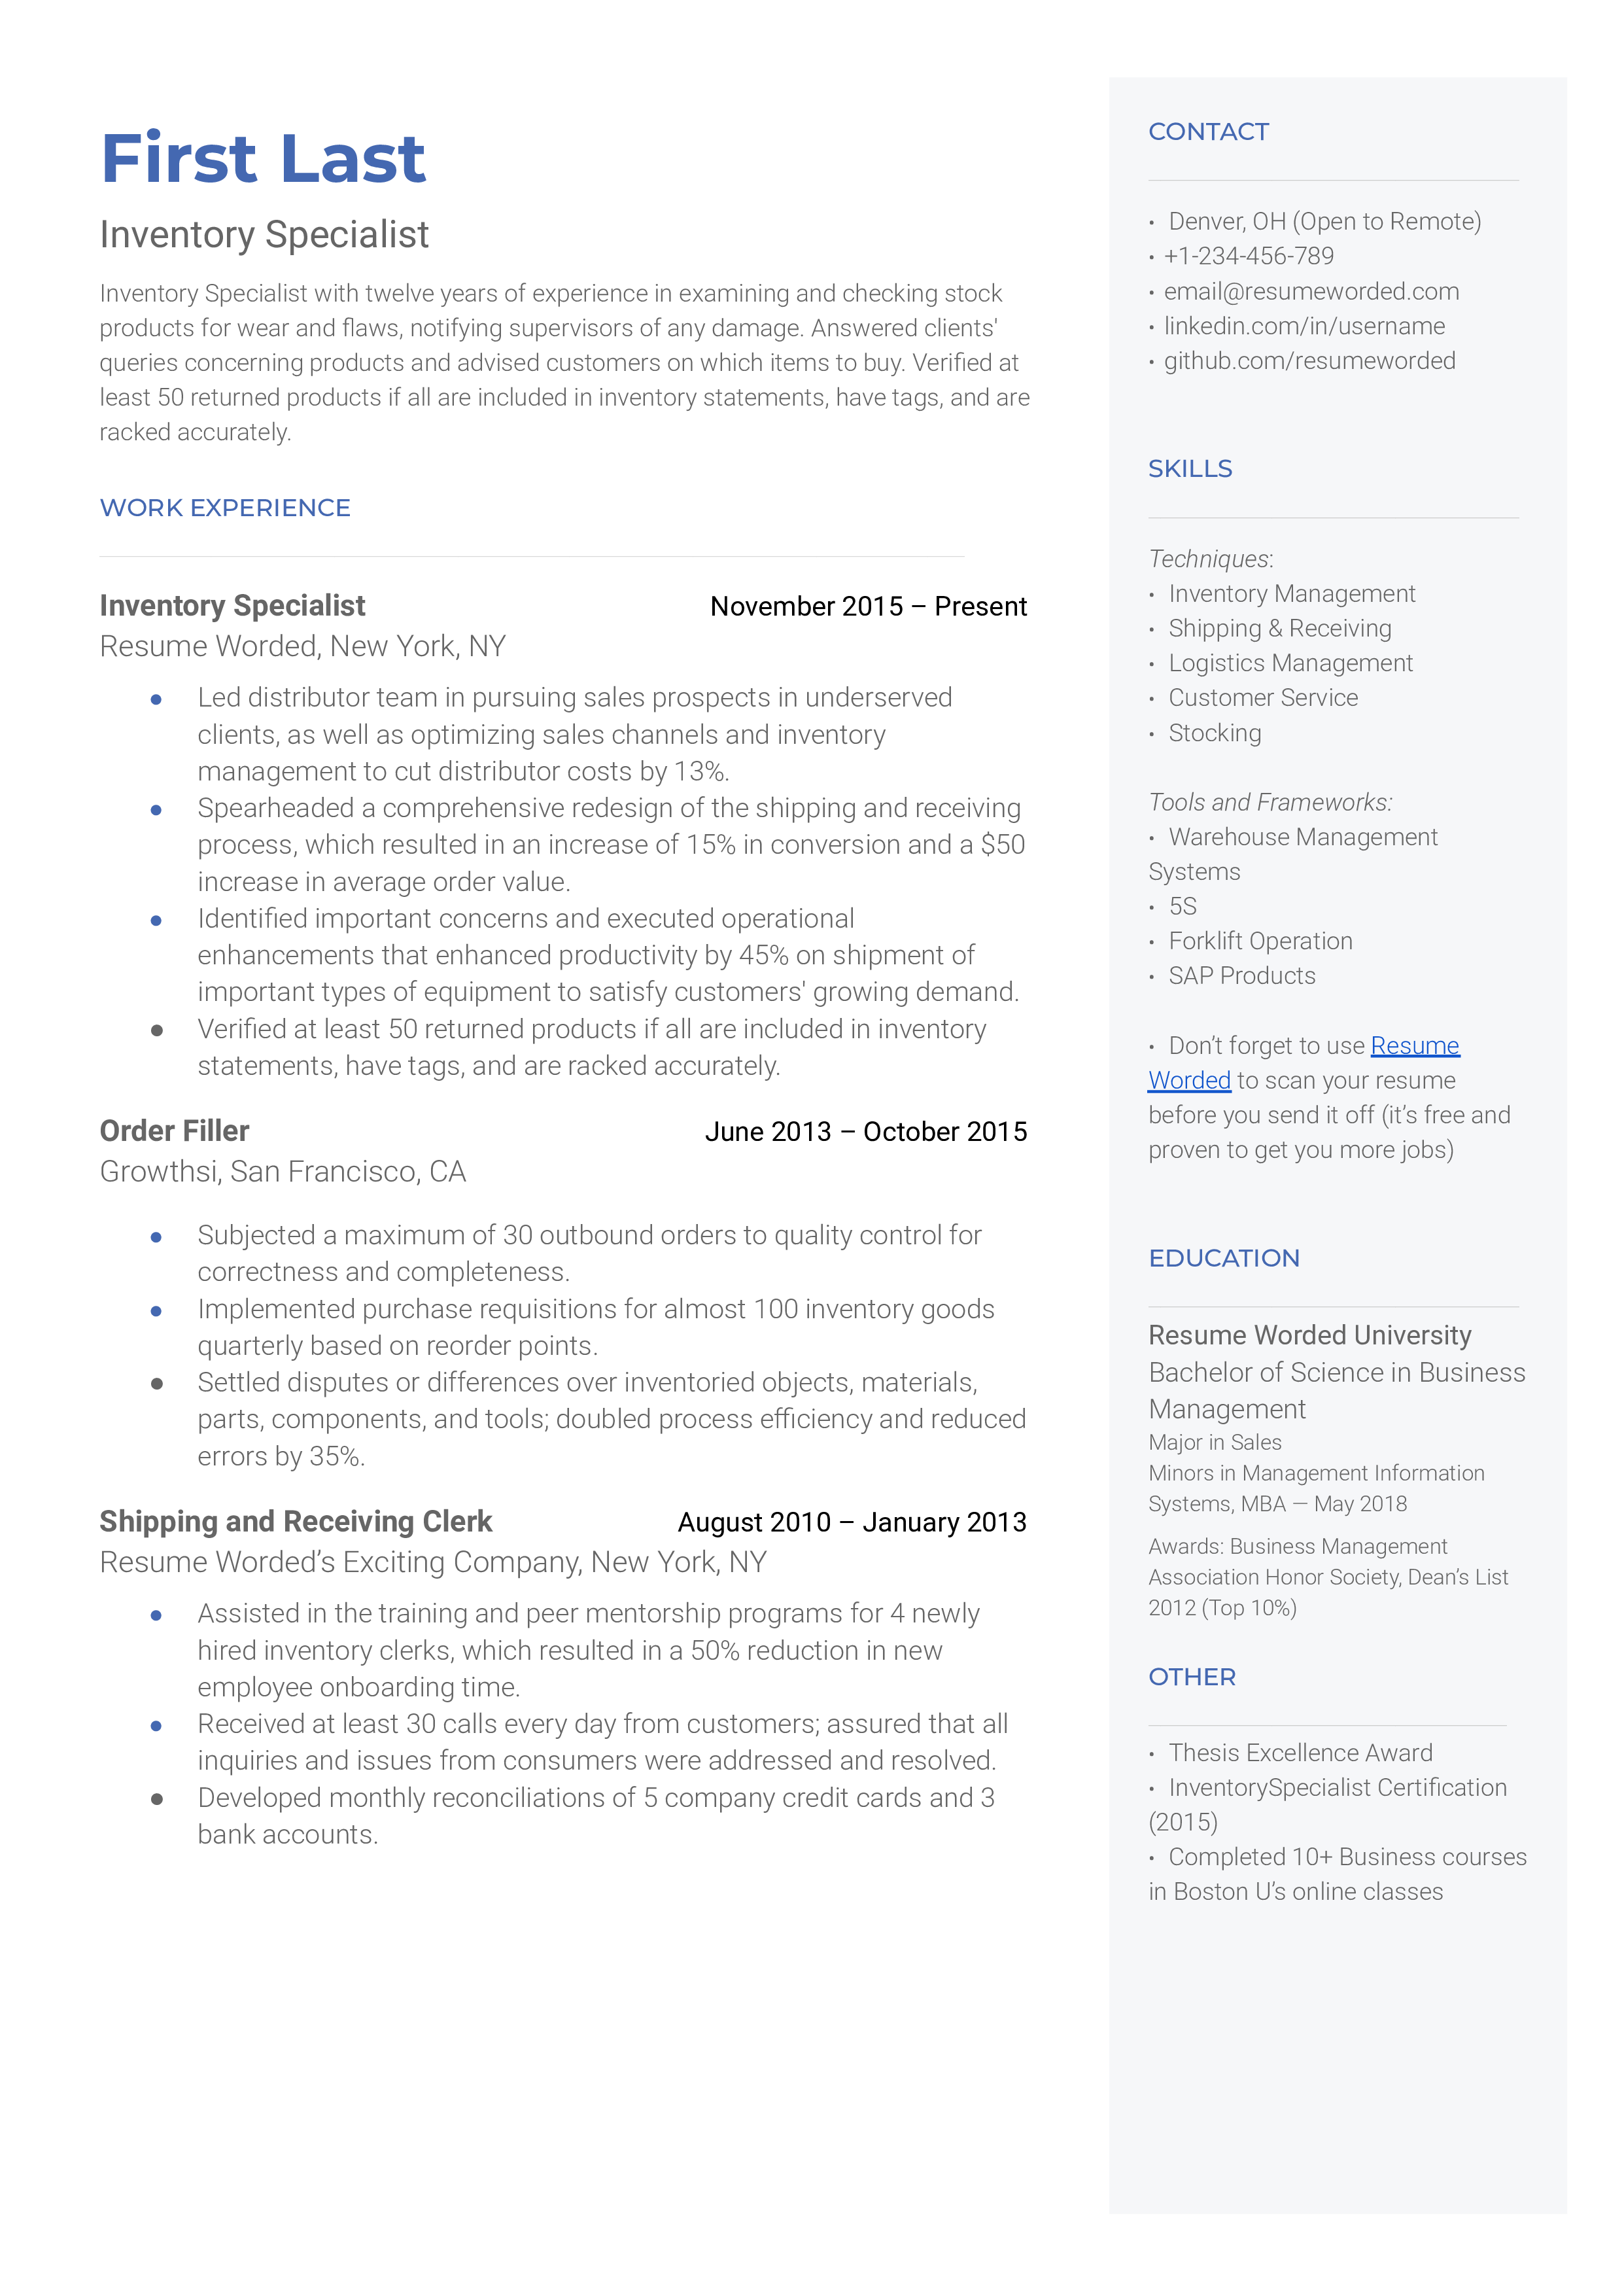 An Inventory Specialist resume template showcasing an applicant's work experience and skill set.